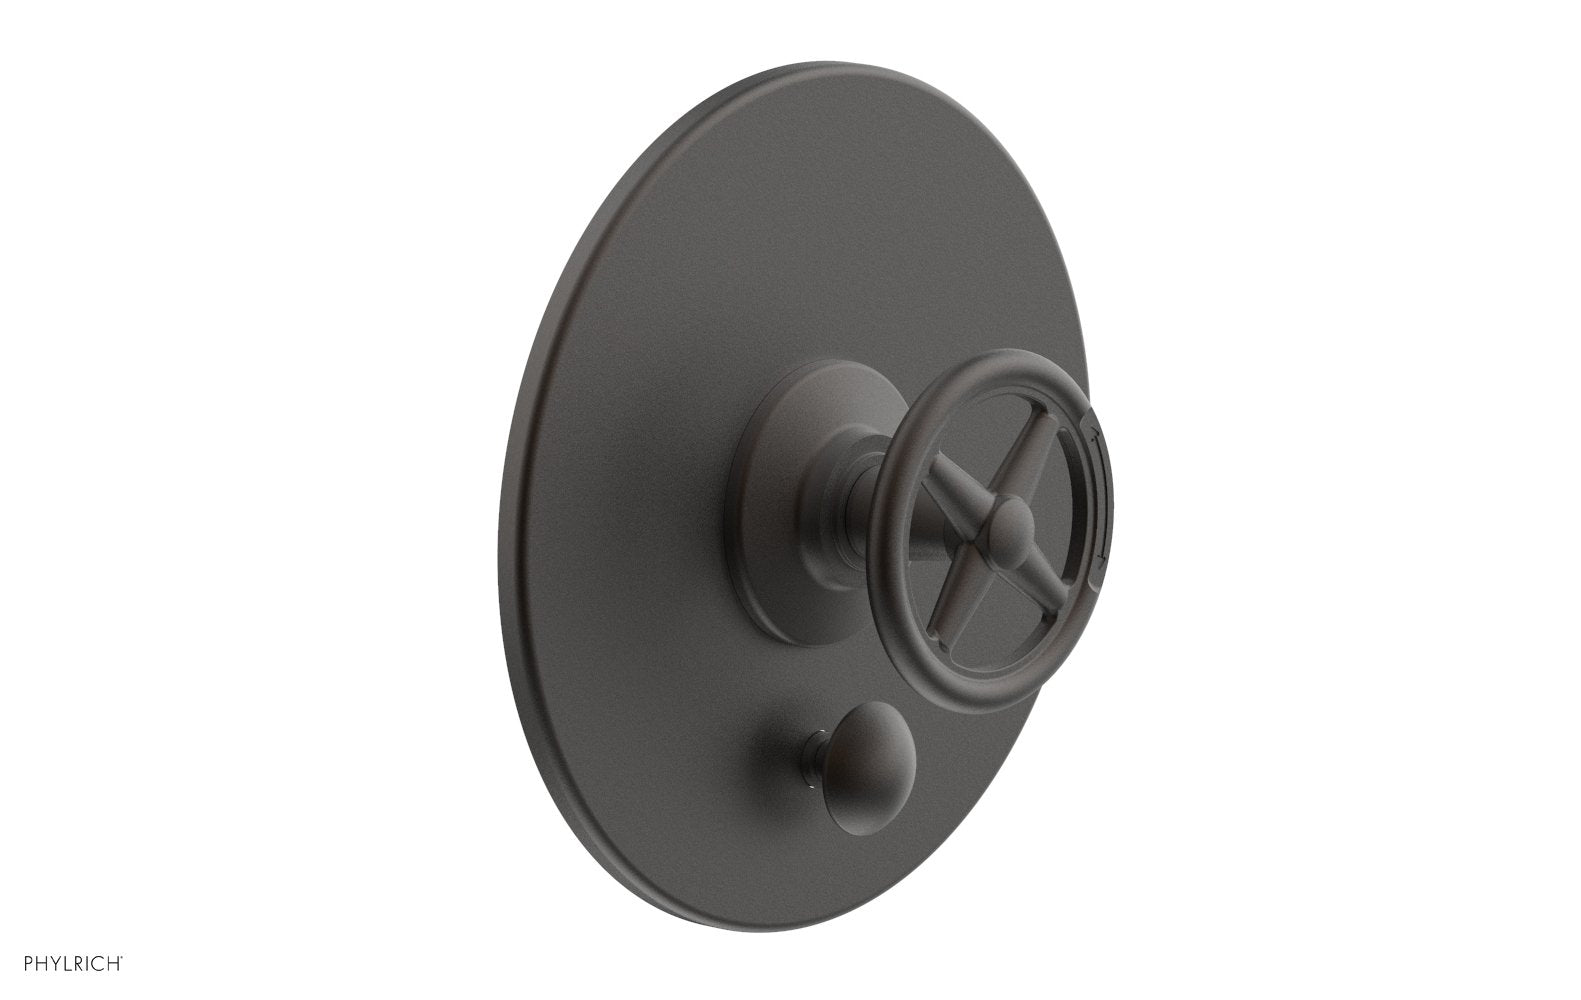 Phylrich WORKS Pressure Balance Shower Plate with Diverter and Handle Trim Set